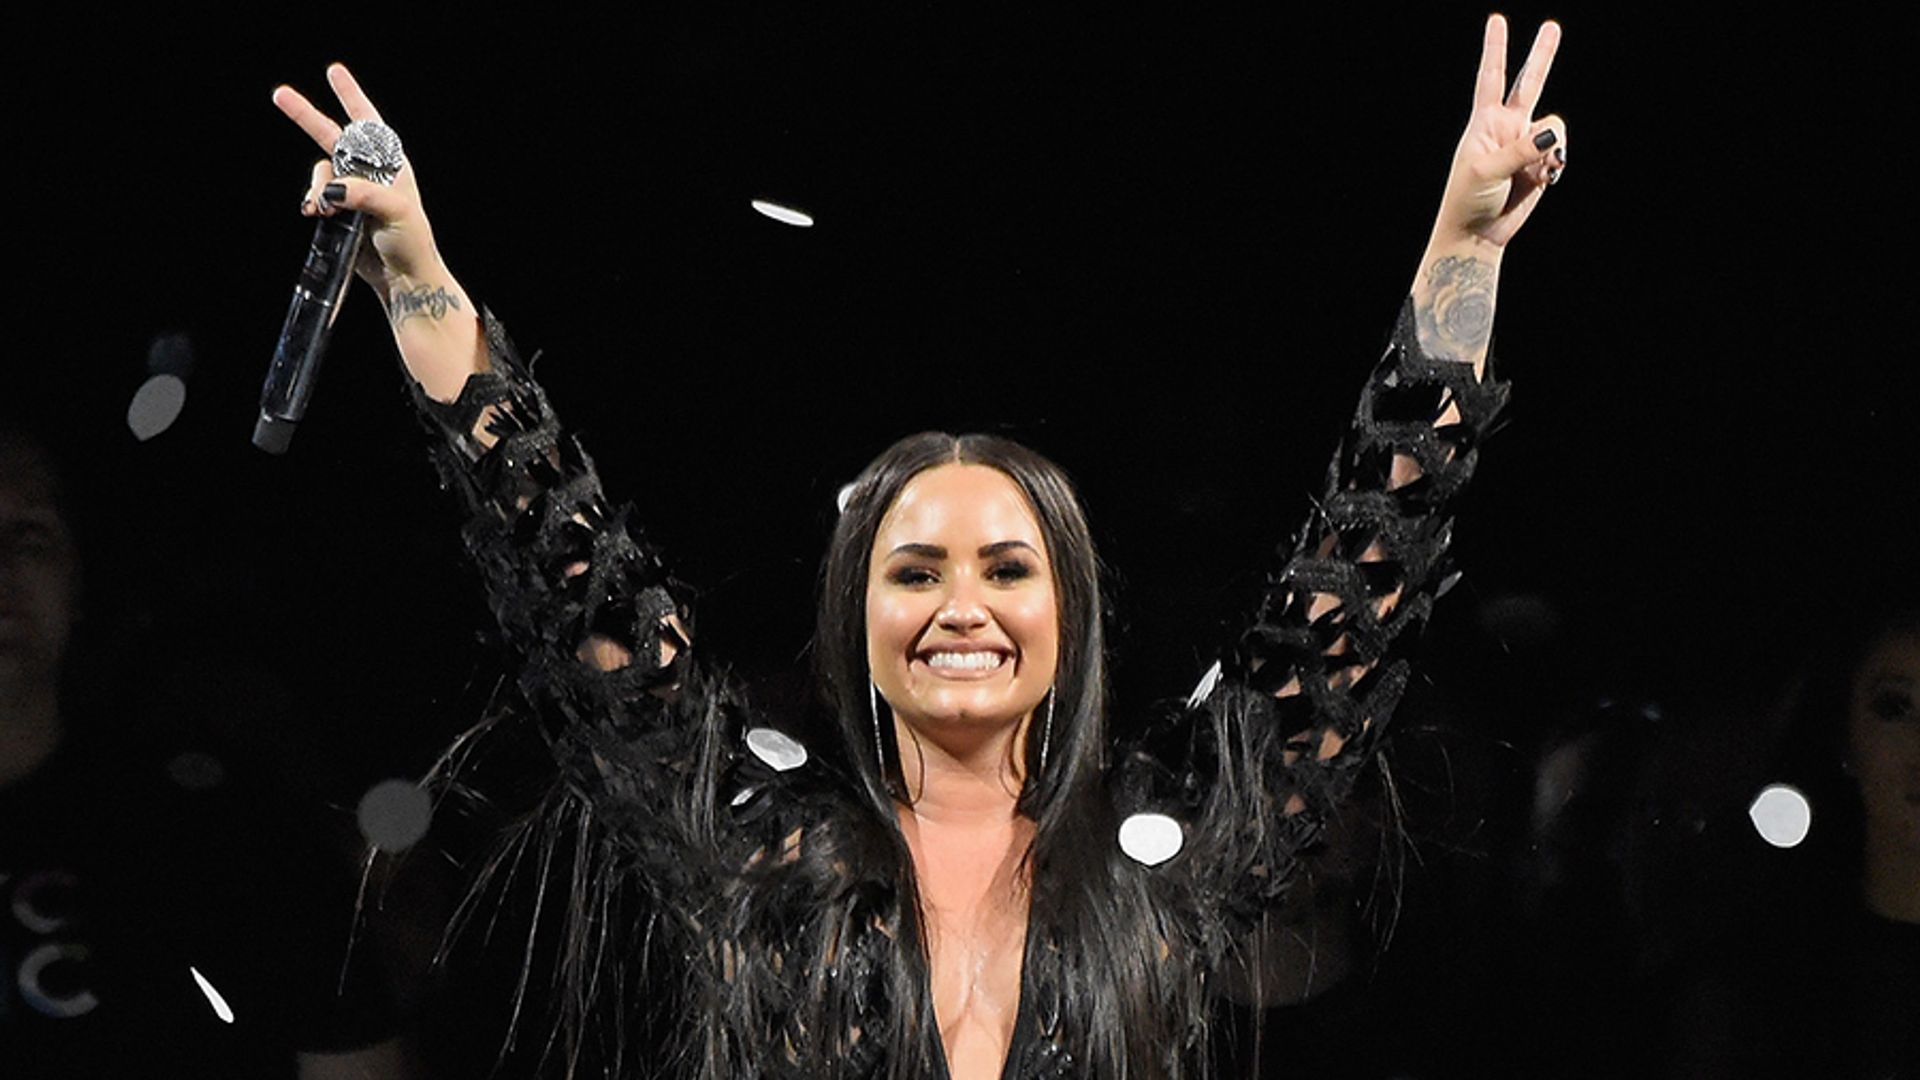 Demi Lovato's most empowering quotes about addiction, mental health and more